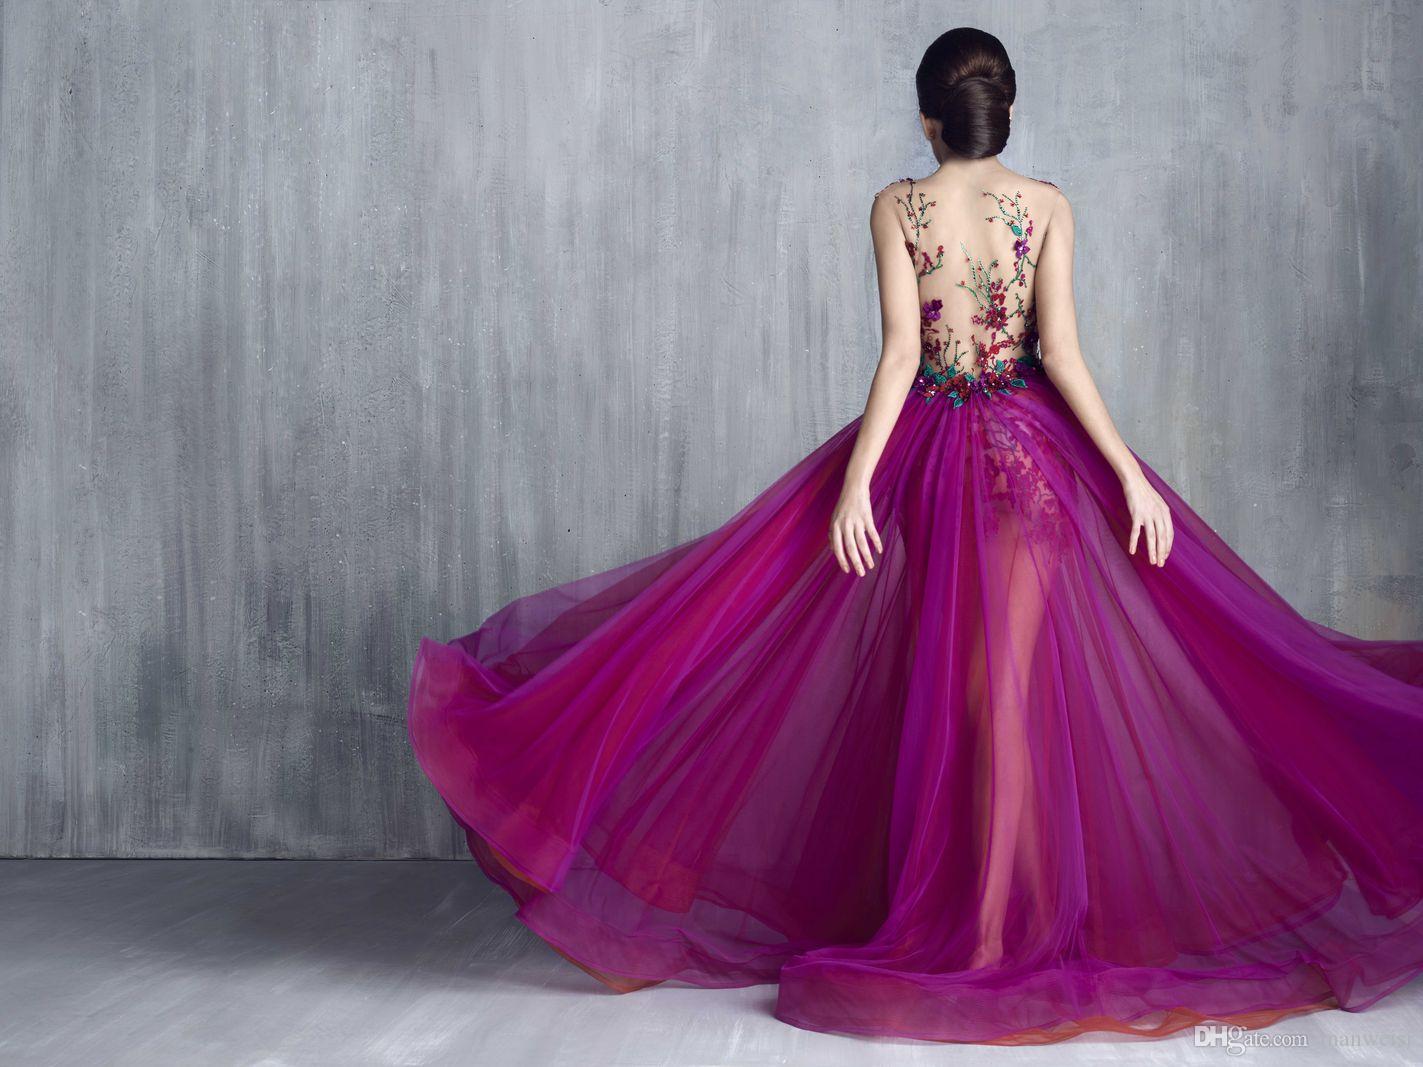 Choose a Rainbow of Prom Dresses and We’ll Guess Your Generation and Zodiac Sign purple prom dress